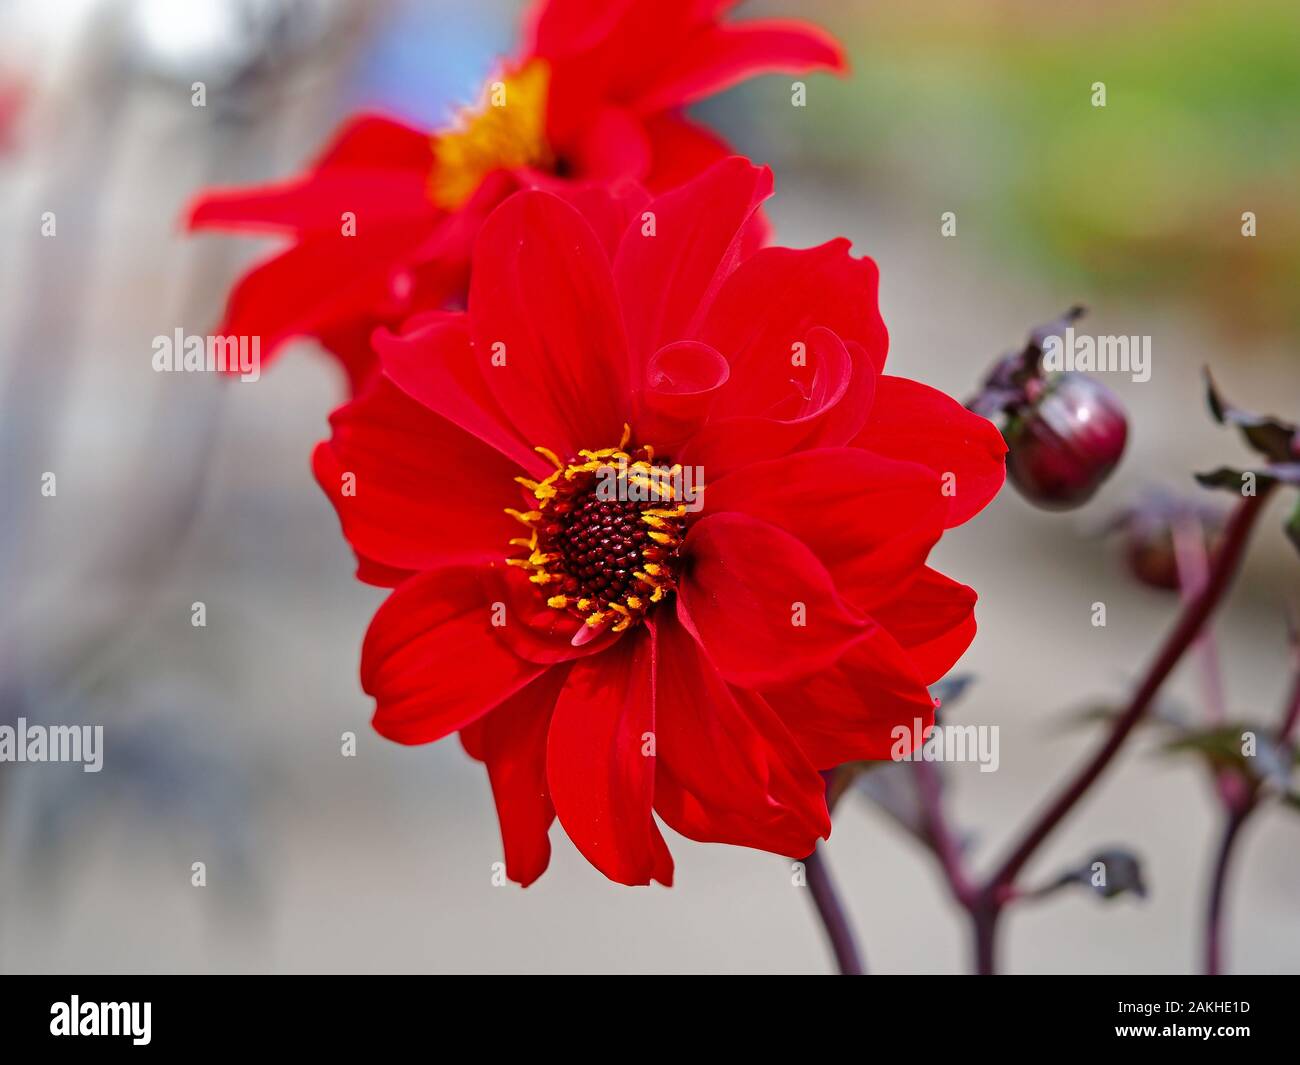 Closeup of a red single Dahlia flower and bud in a garden Stock Photo